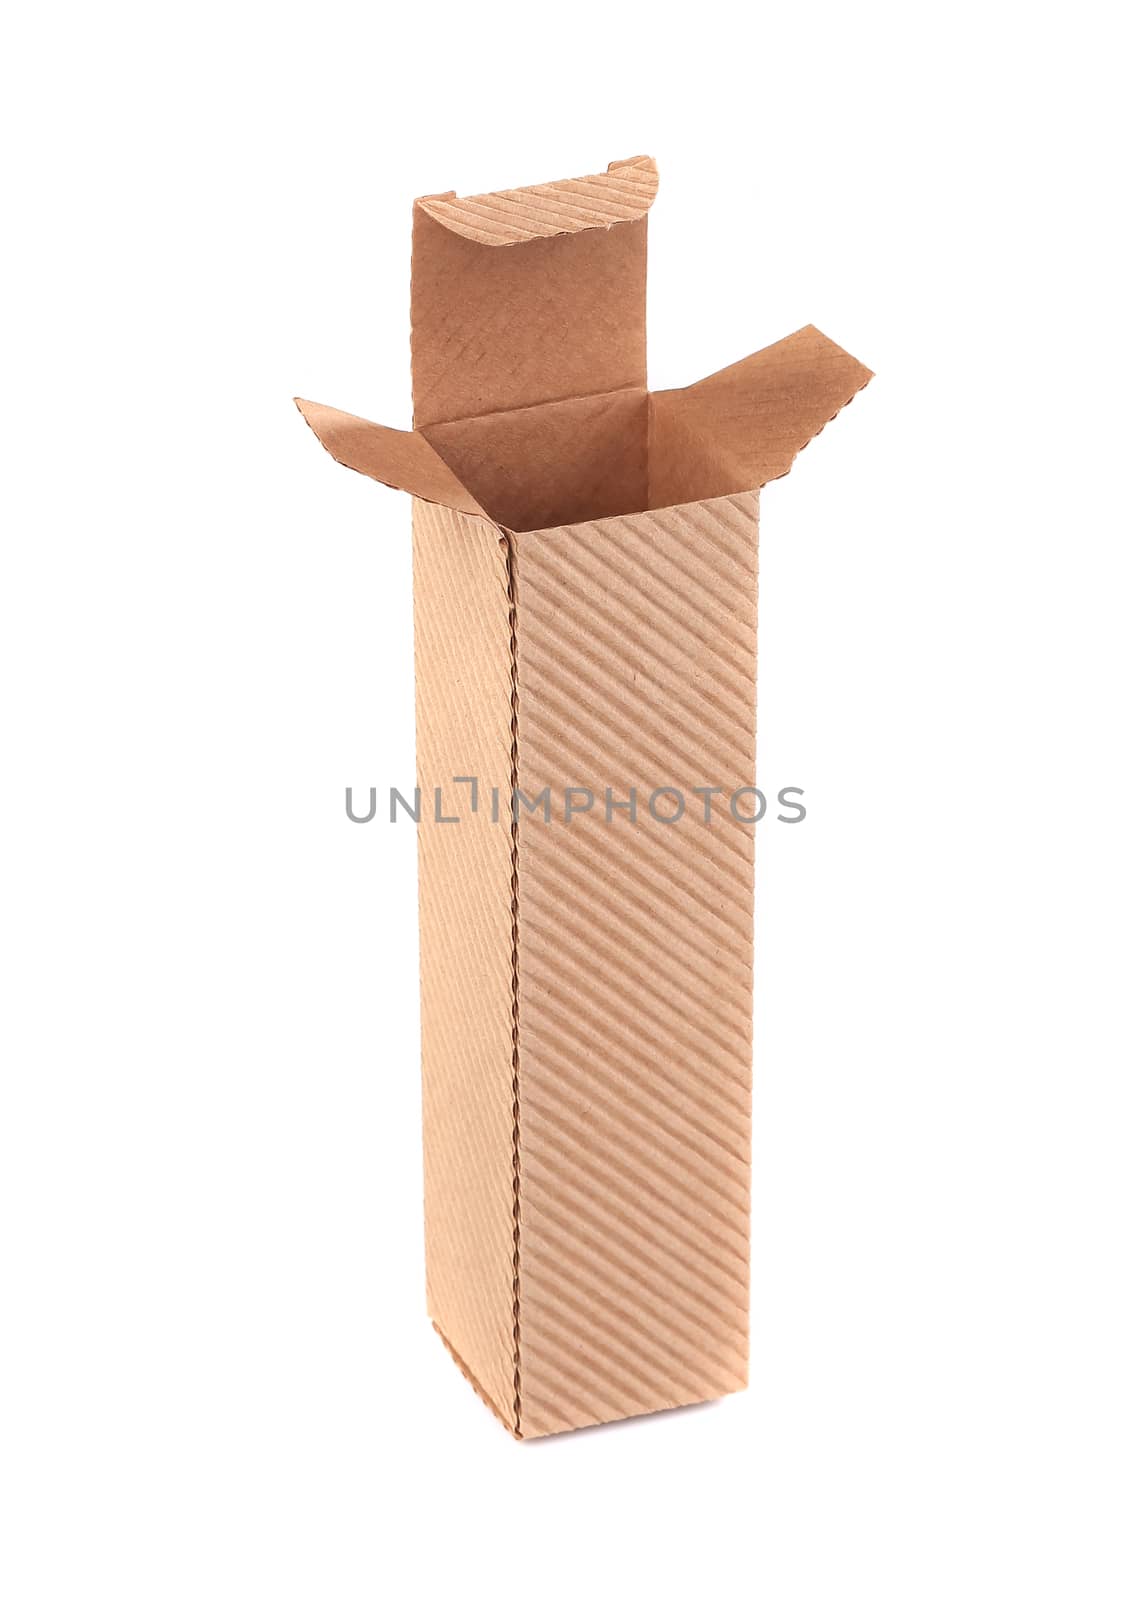 Opened cardboard box. Isolated on a white background.